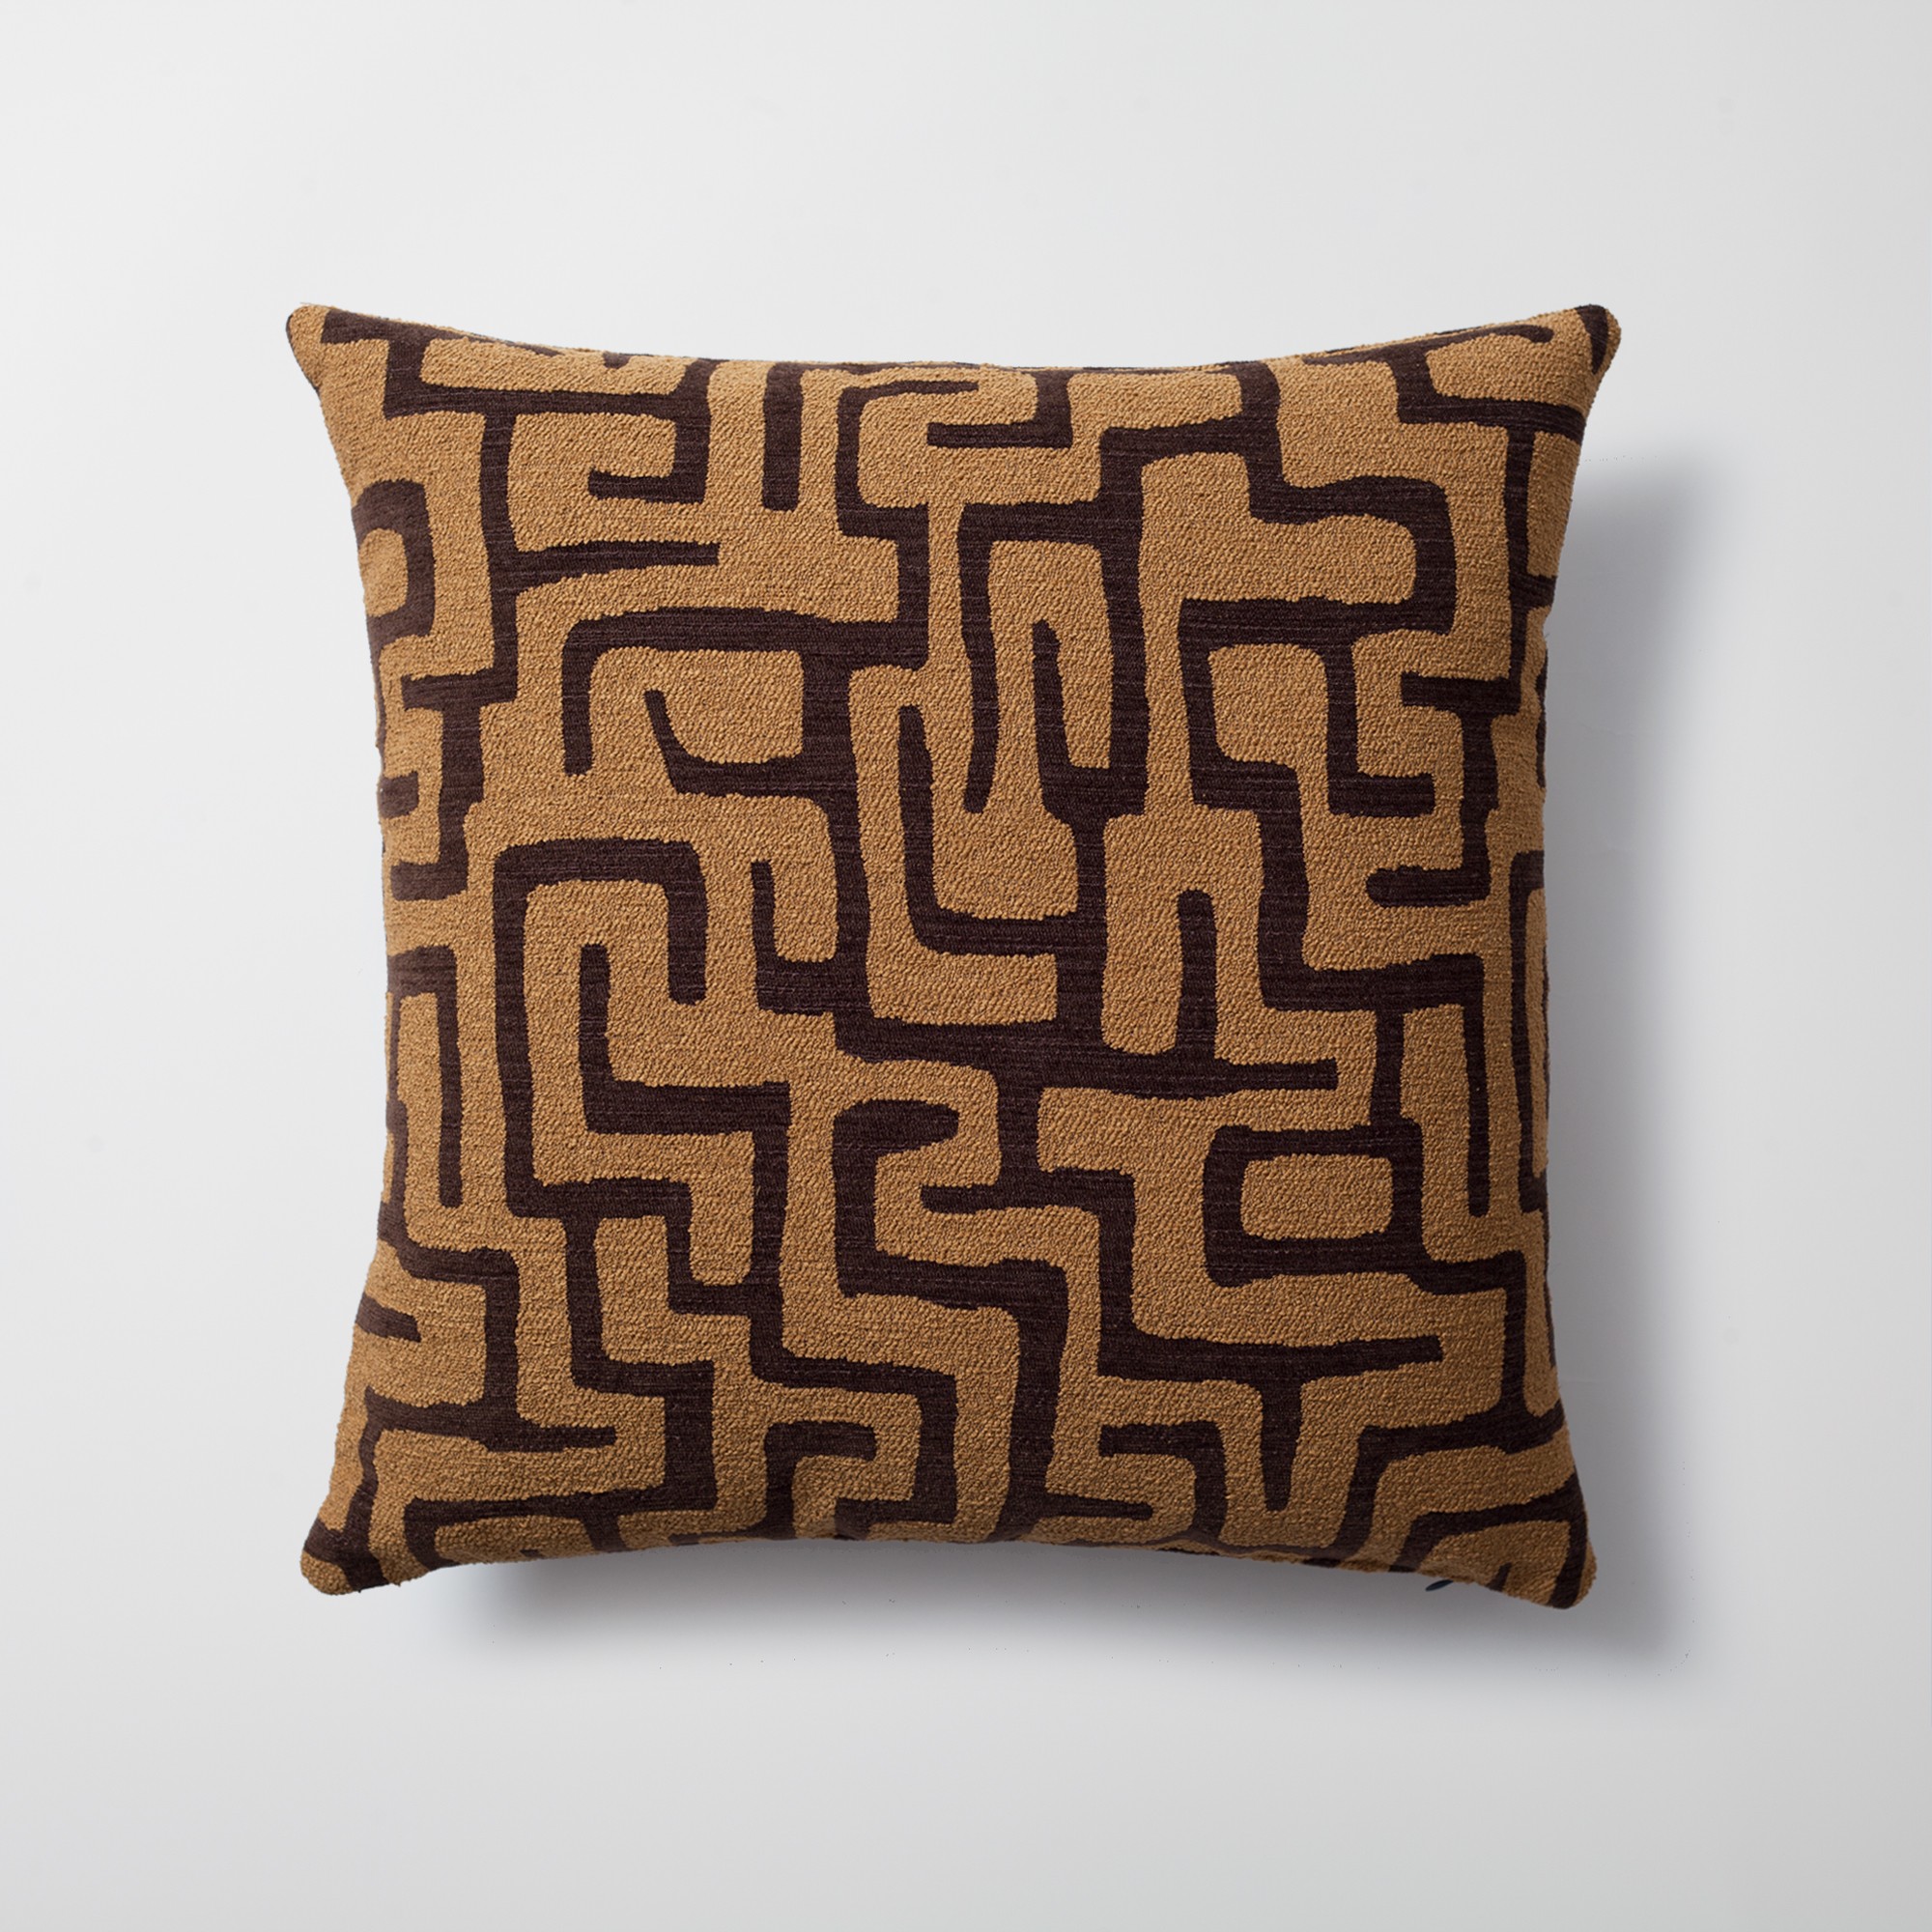 "Norm" - Maze Patterned 20x20 Inch Pillow - Brown (Cover Only)